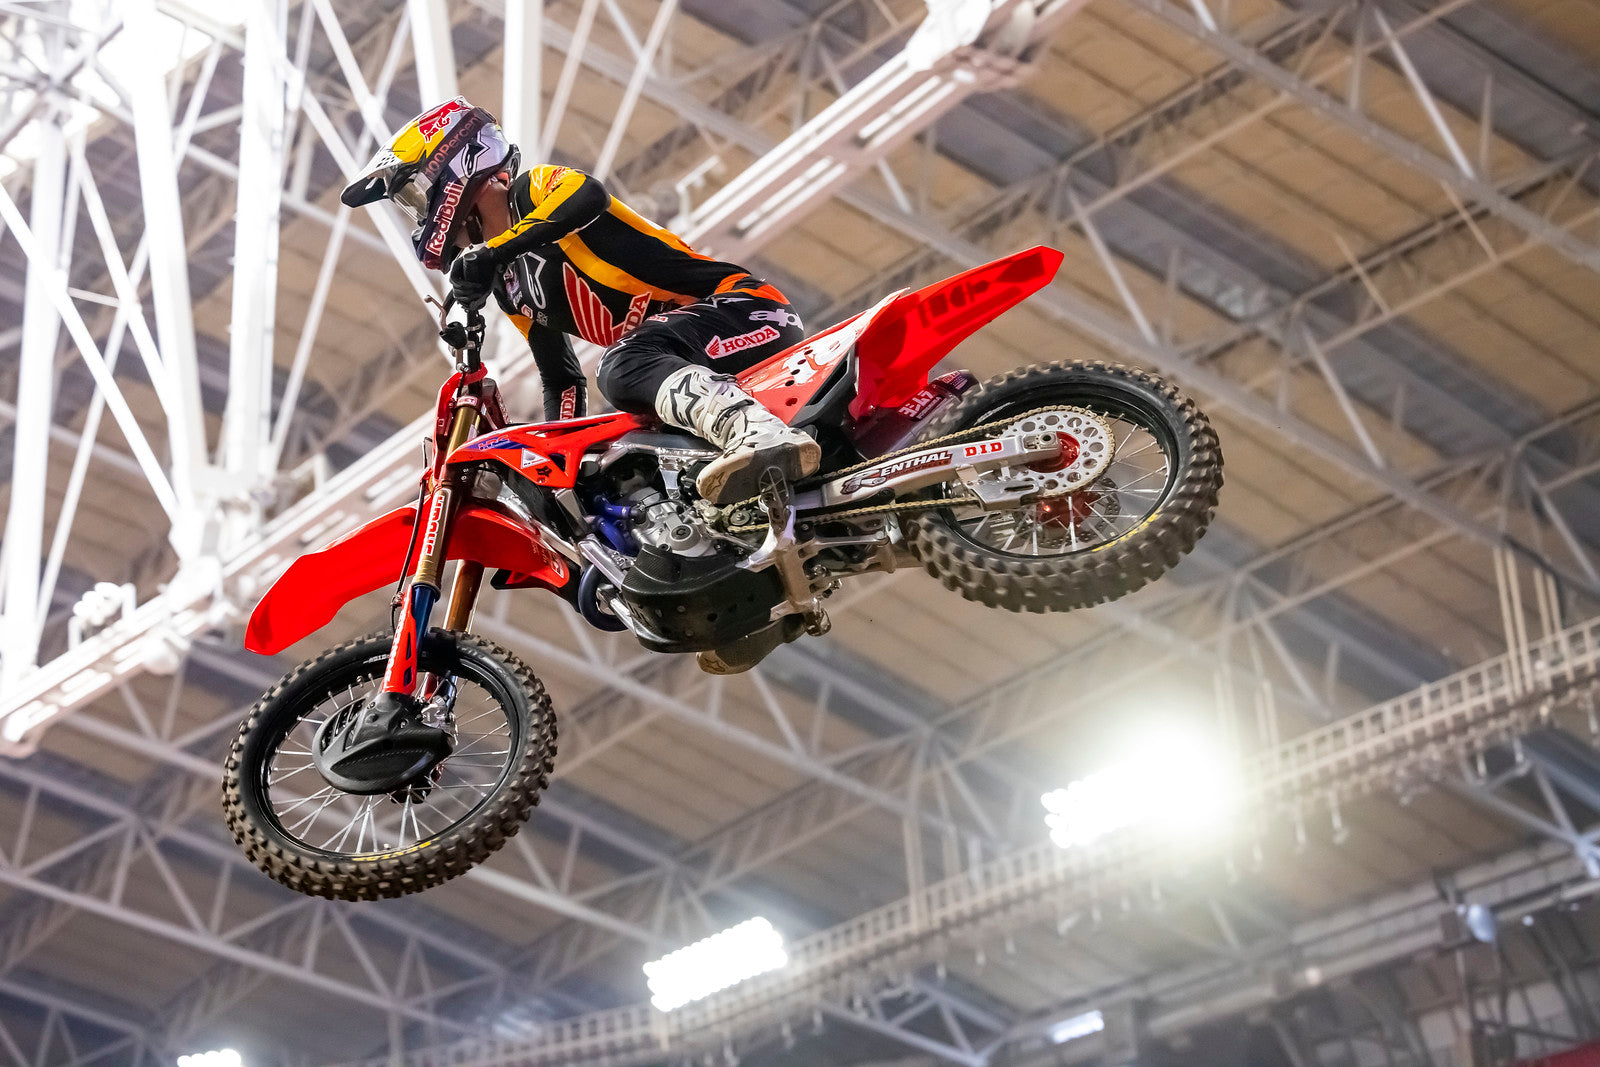 HIGH-FLYING JETT LAWRENCE STORMS TO 250SX WEST VICTORY AT GLENDALE; LEVI KITCHEN THIRD